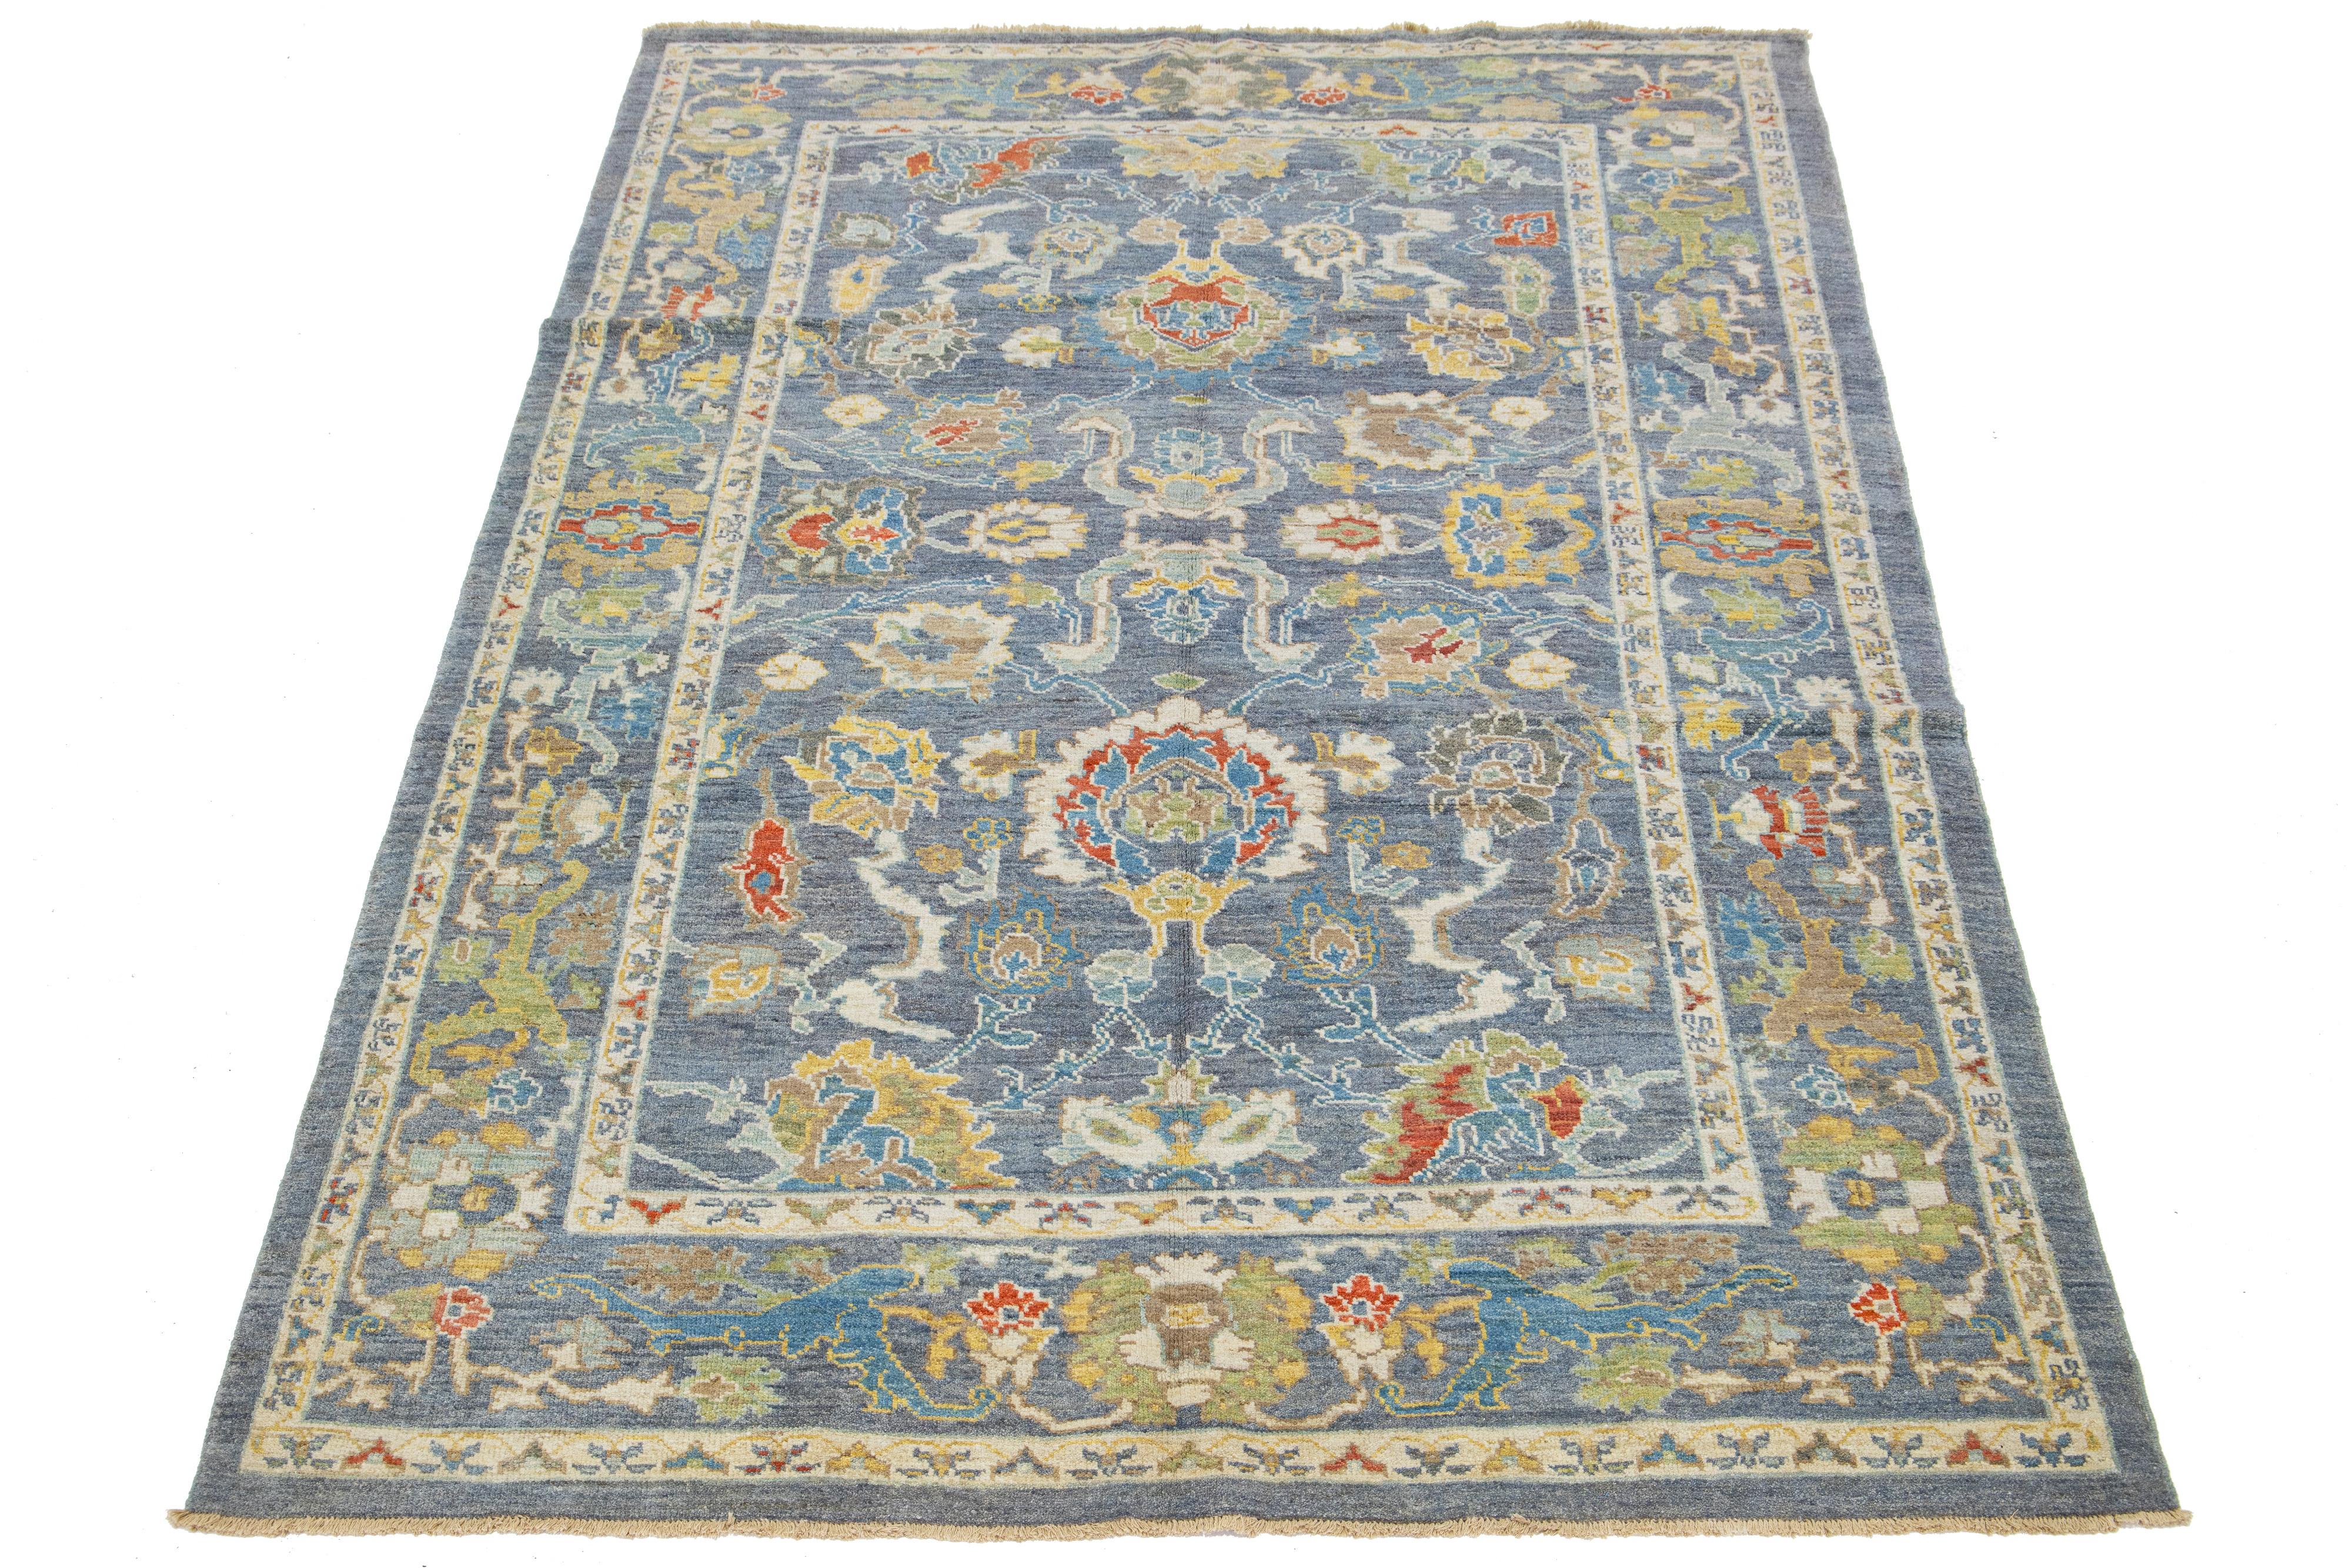 This hand-knotted Sultanabad rug features a modern design with a blue base. The Persian rug is bordered with a beige frame and embellished with many colors that form an attractive floral pattern.

This rug measures 6'7